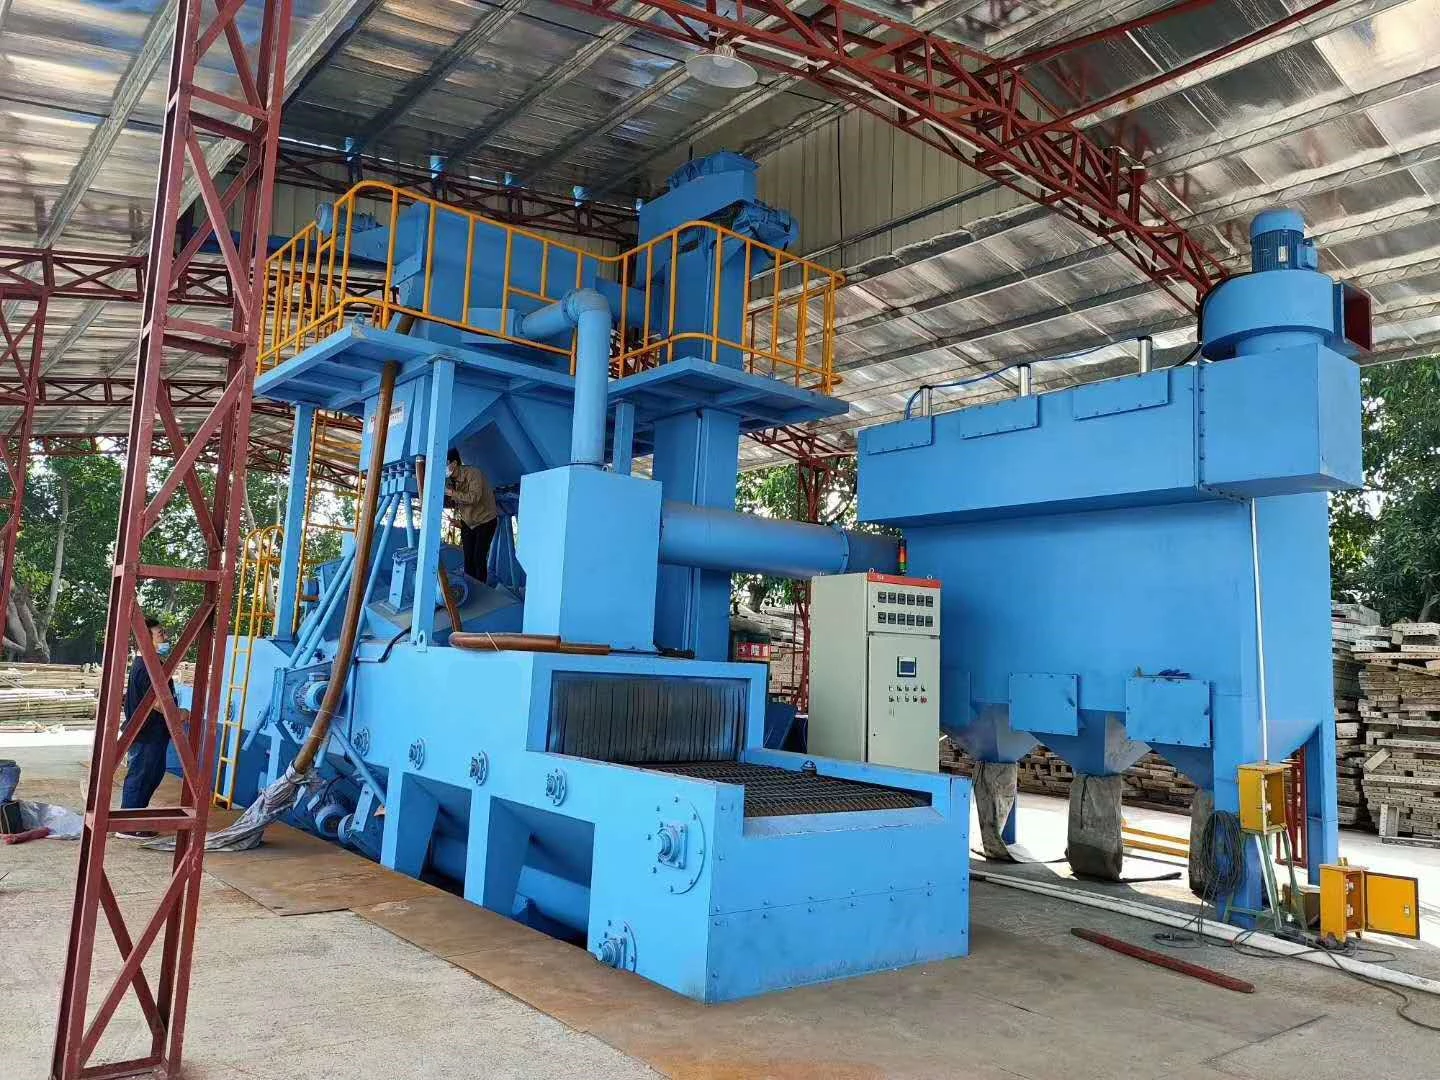 What Is Shot Blasting Machine Used For?